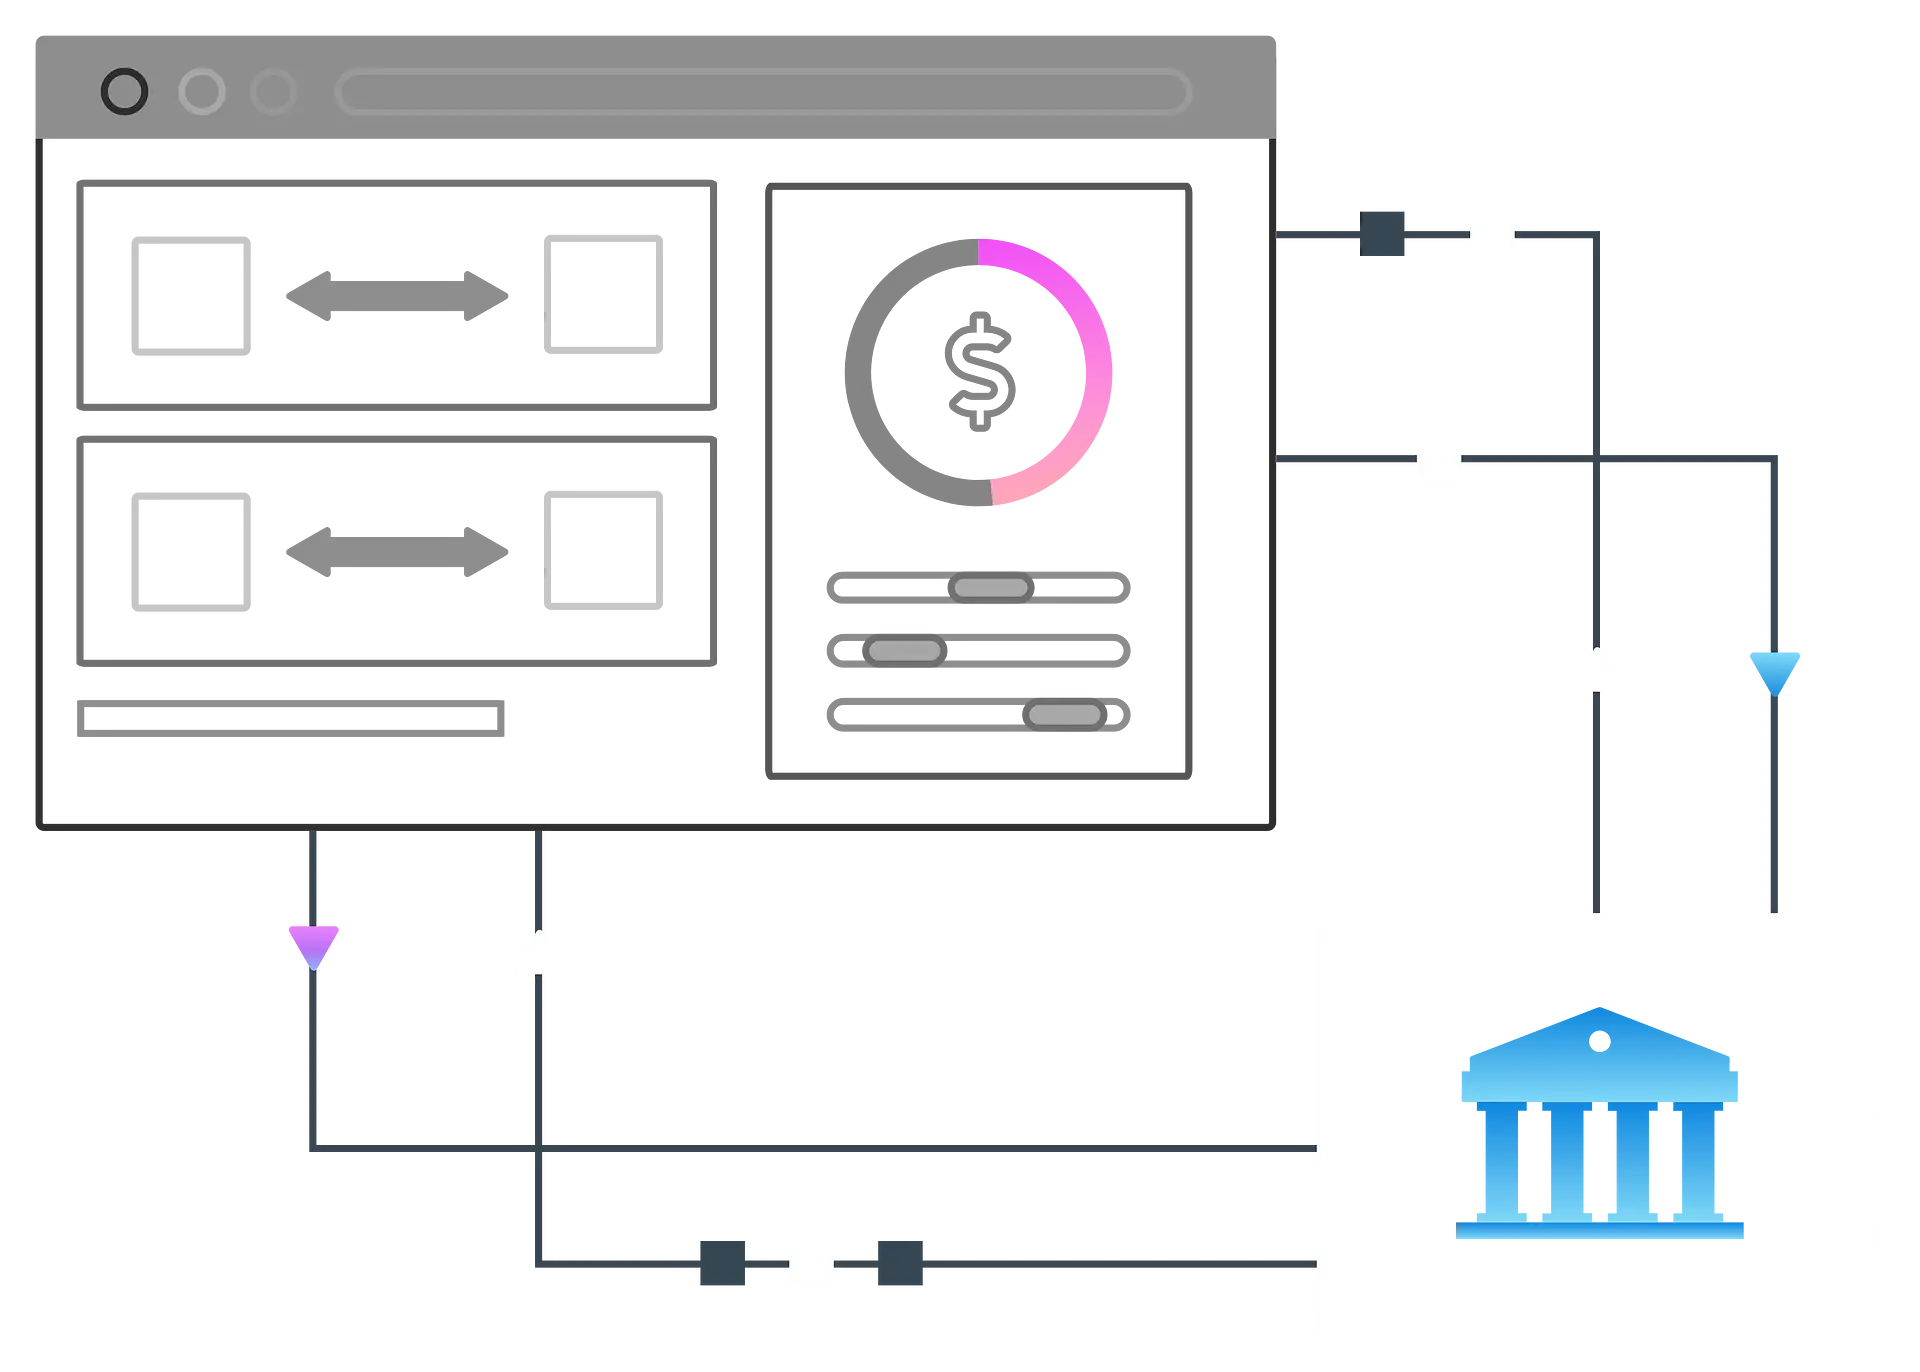 Scheme of automotive finance industry illustrating the interactions between the client and lender